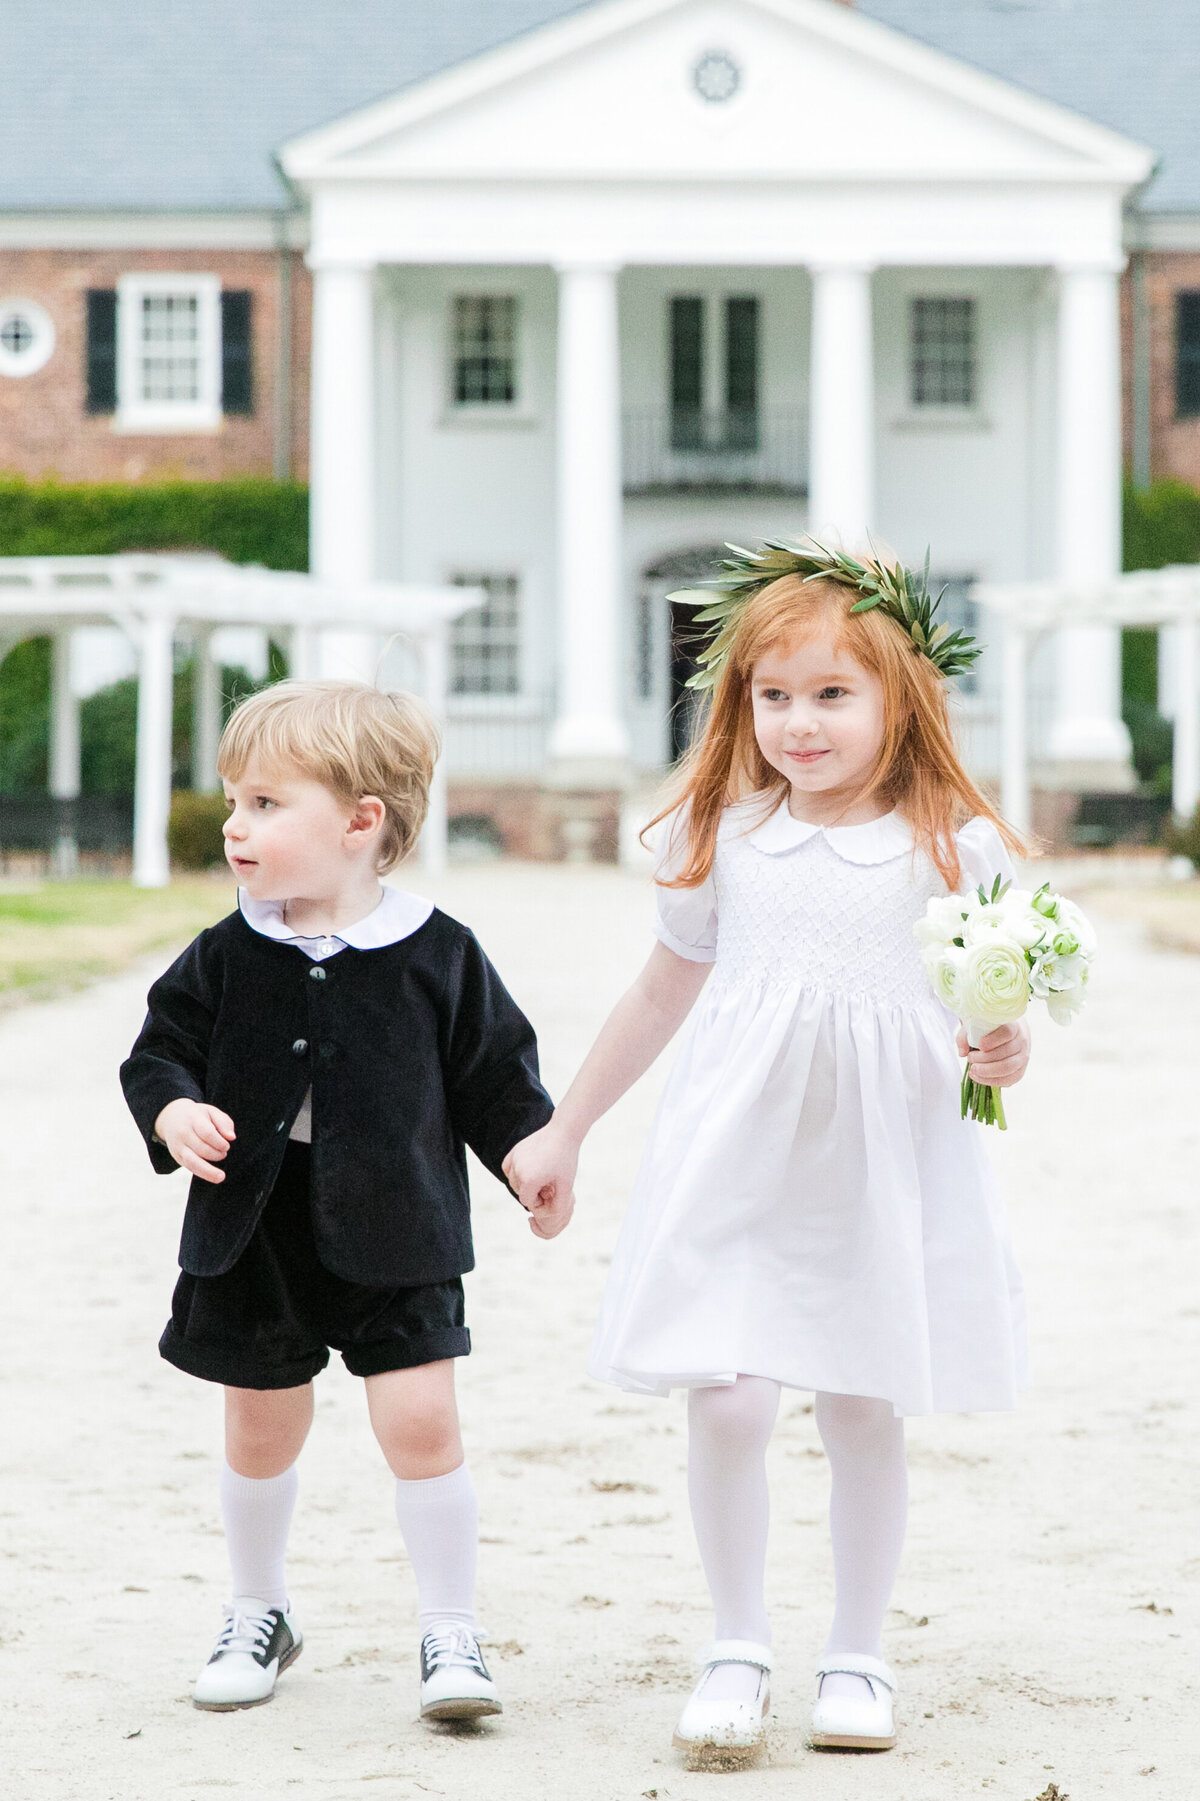 Flower girl and ring bearer walking down aisle at a wedding in Charleston, SC photographed by Dana Cubbage Weddings.